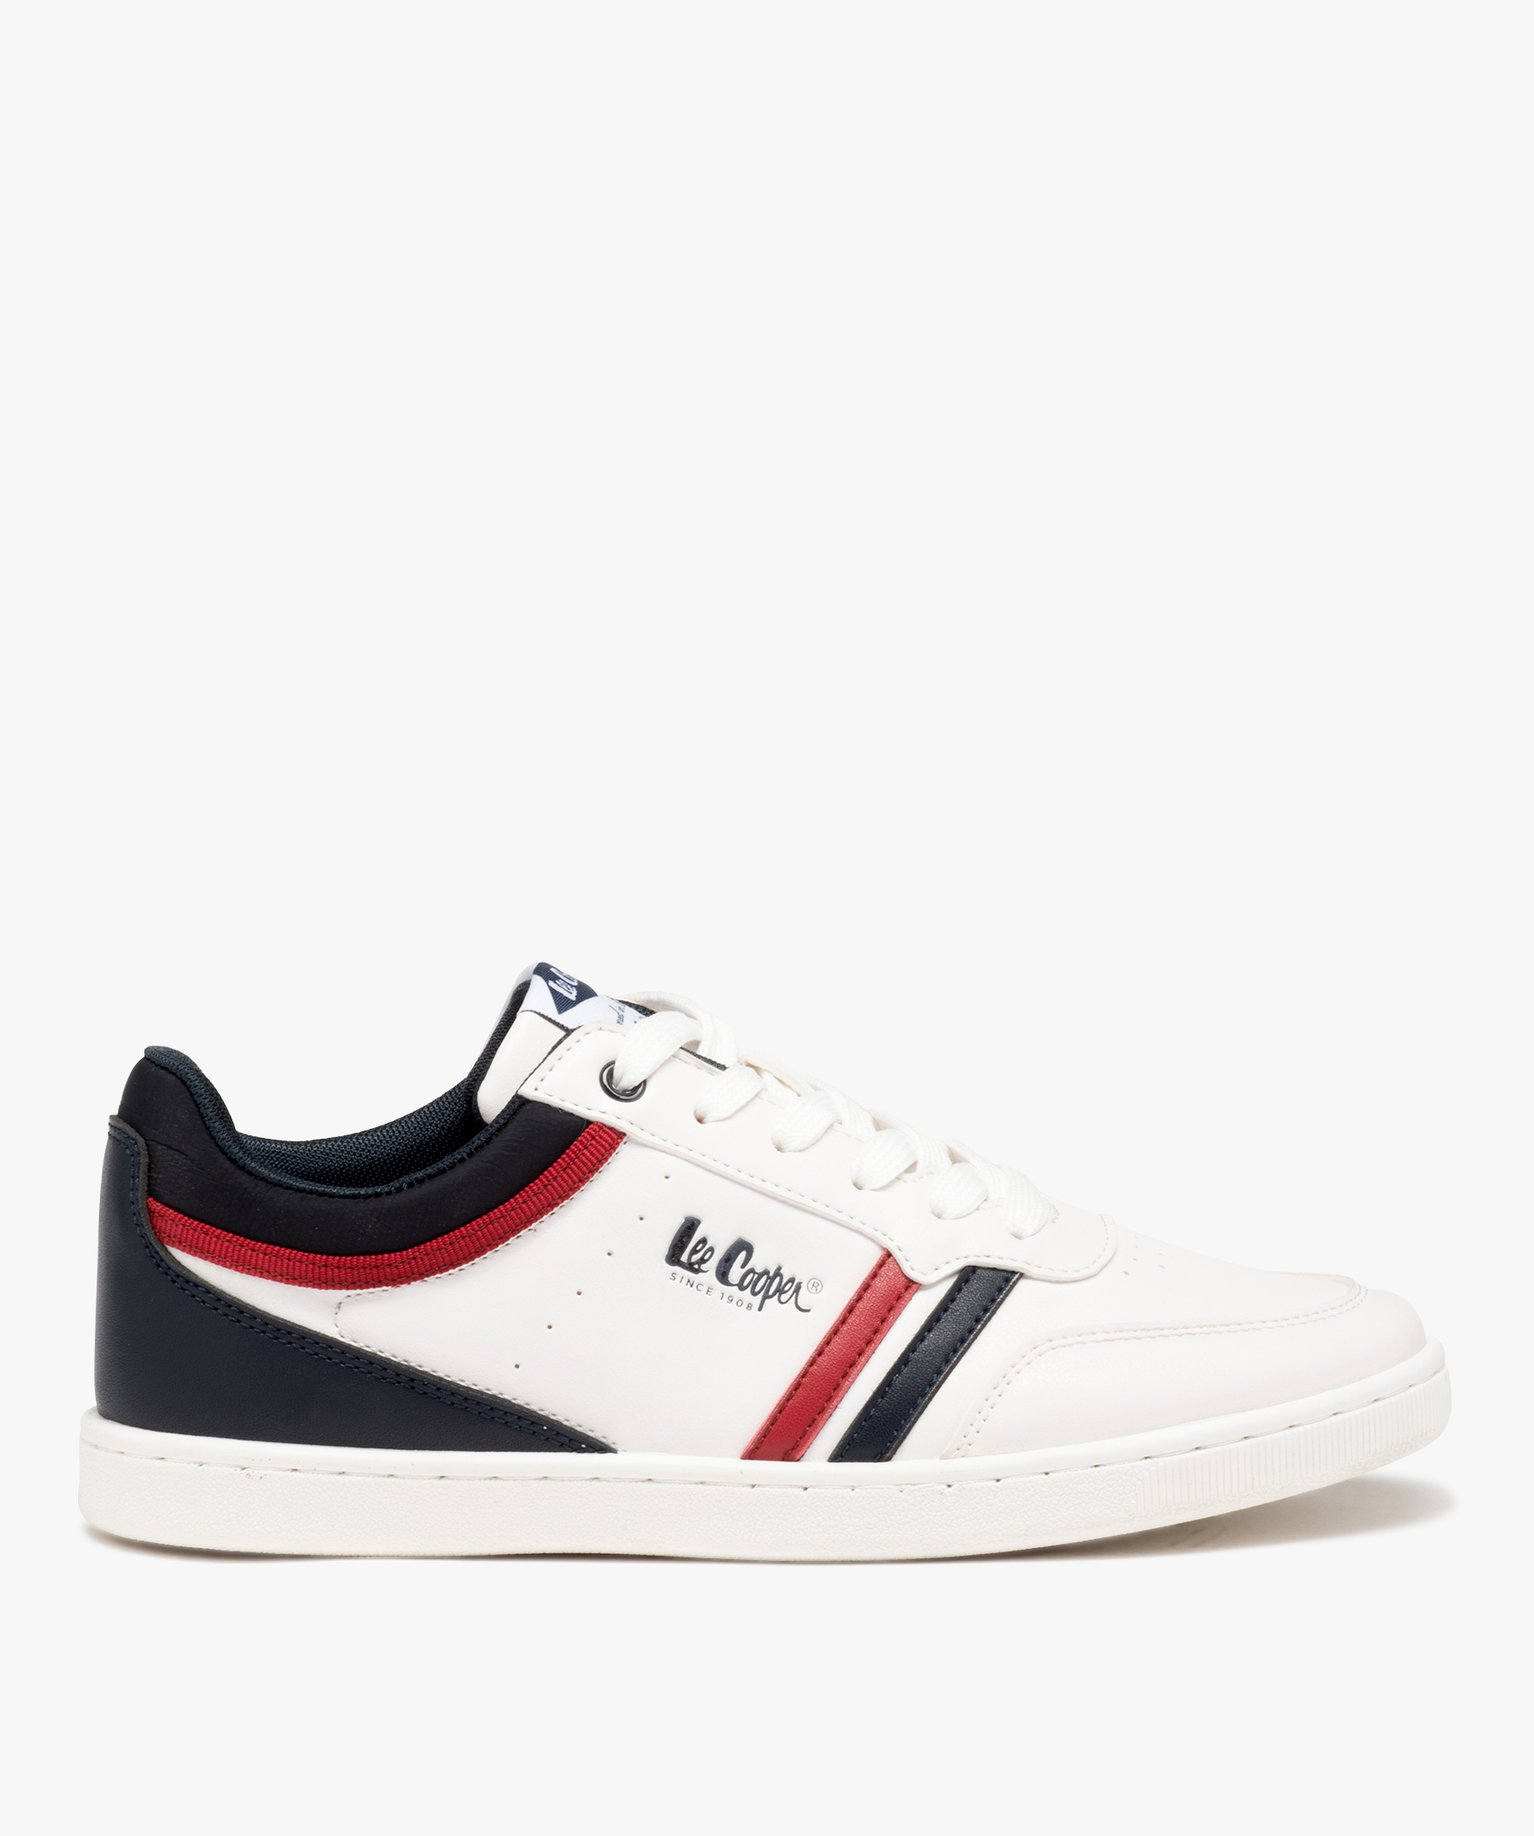 baskets homme casual a bandes colorees - lee cooper blanc